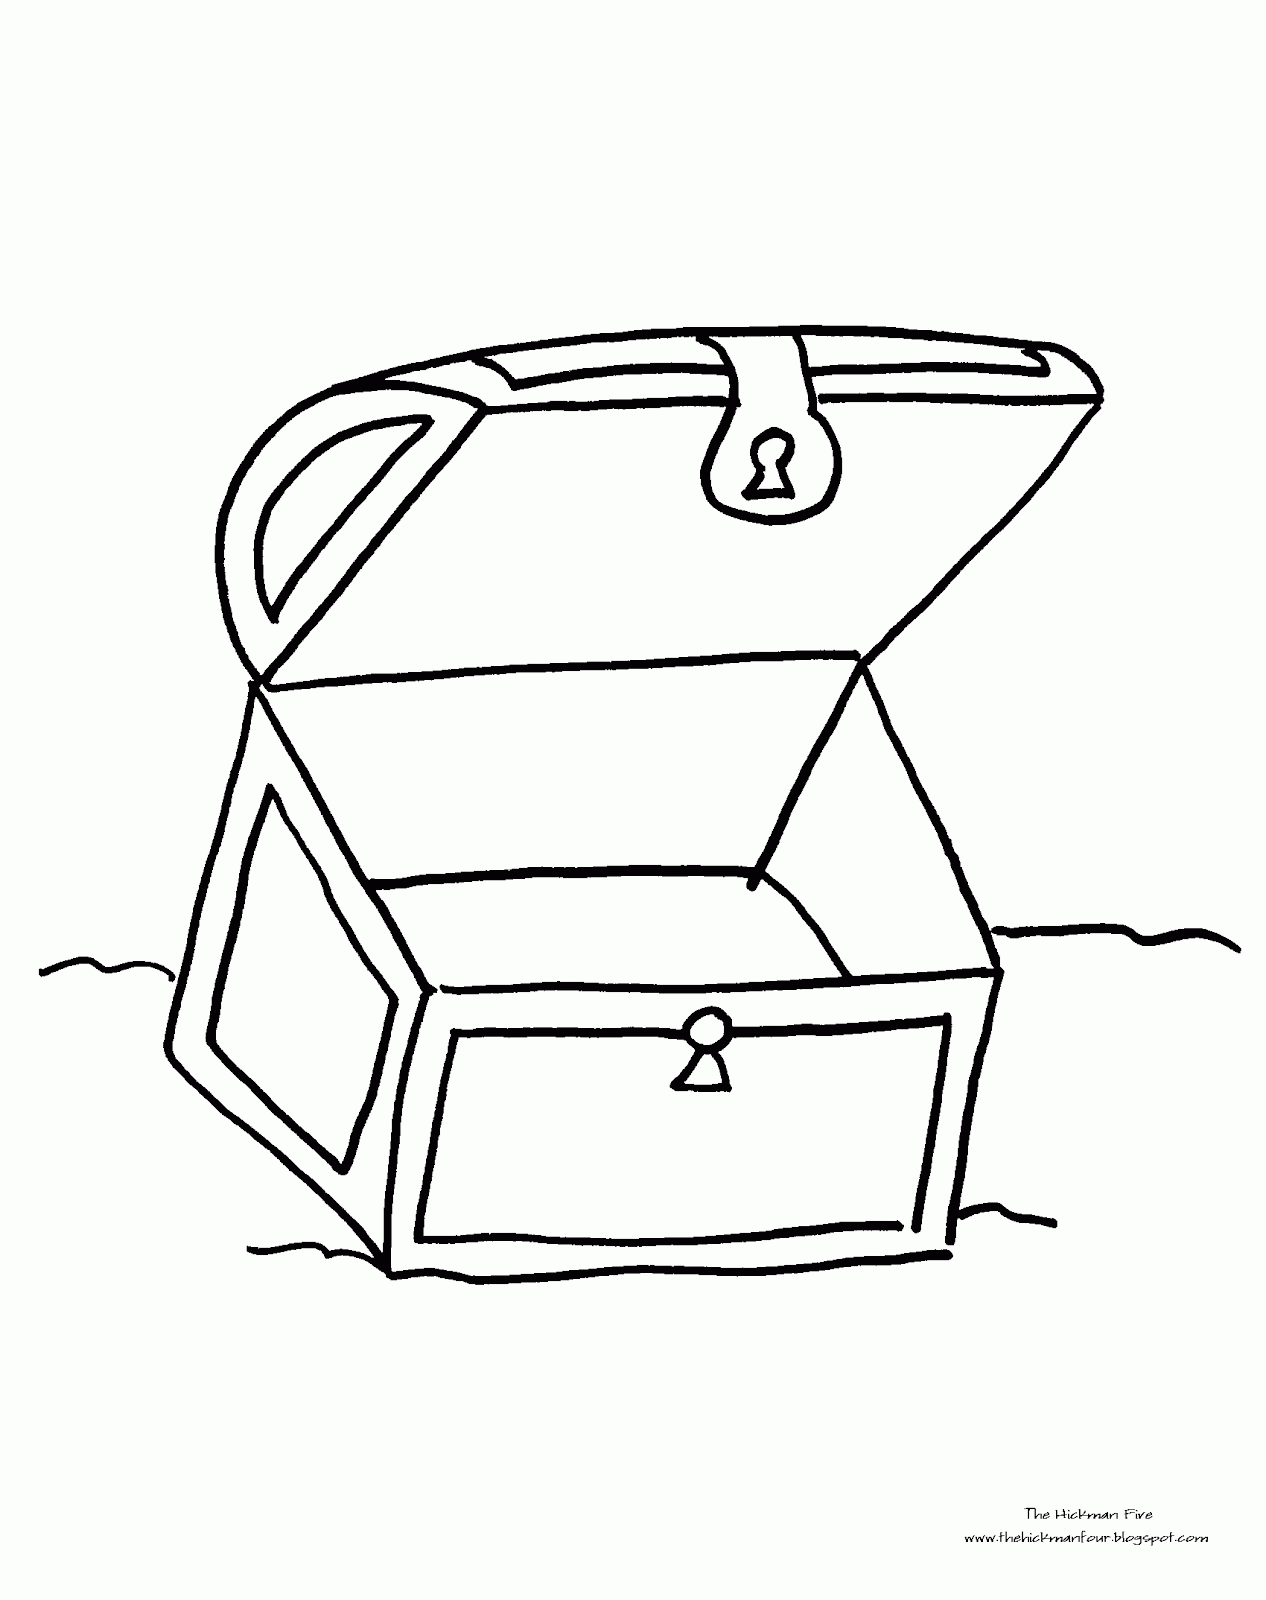 Treasure Chest Coloring Pages - Coloring 